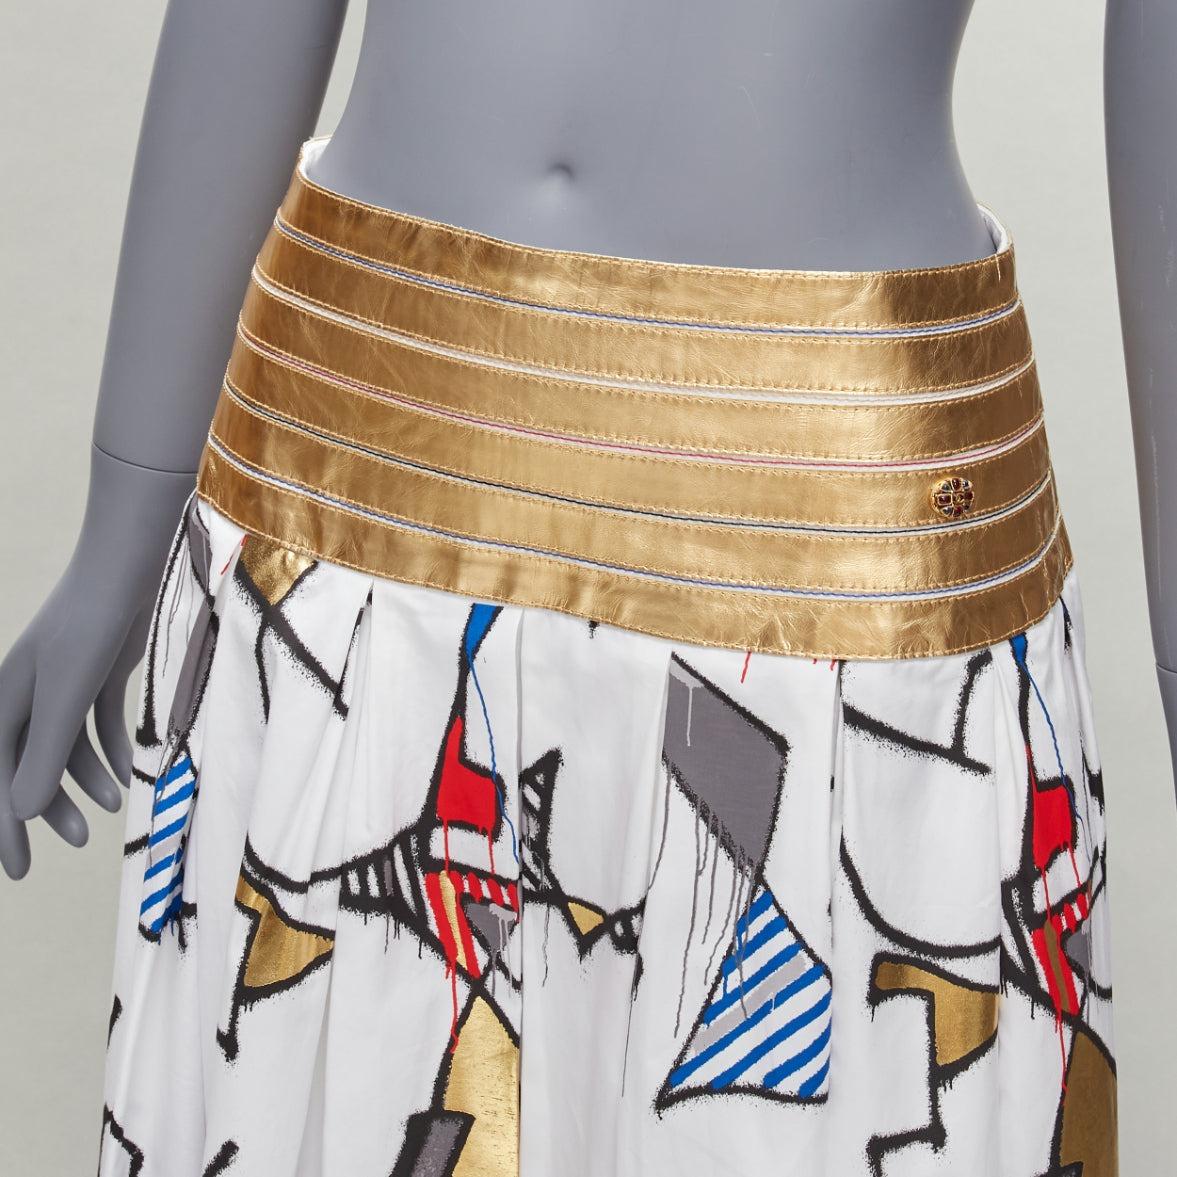 CHANEL 2019 Runway gold lambskin waistband multicolour abstract print skirt FR38 M
Reference: TGAS/D00794
Brand: Chanel
Designer: Virginie Viard
Collection: 2019 - Runway
As seen on: Sheikha Moza bint Nasser Al-Missned
Material: Lambskin Leather,